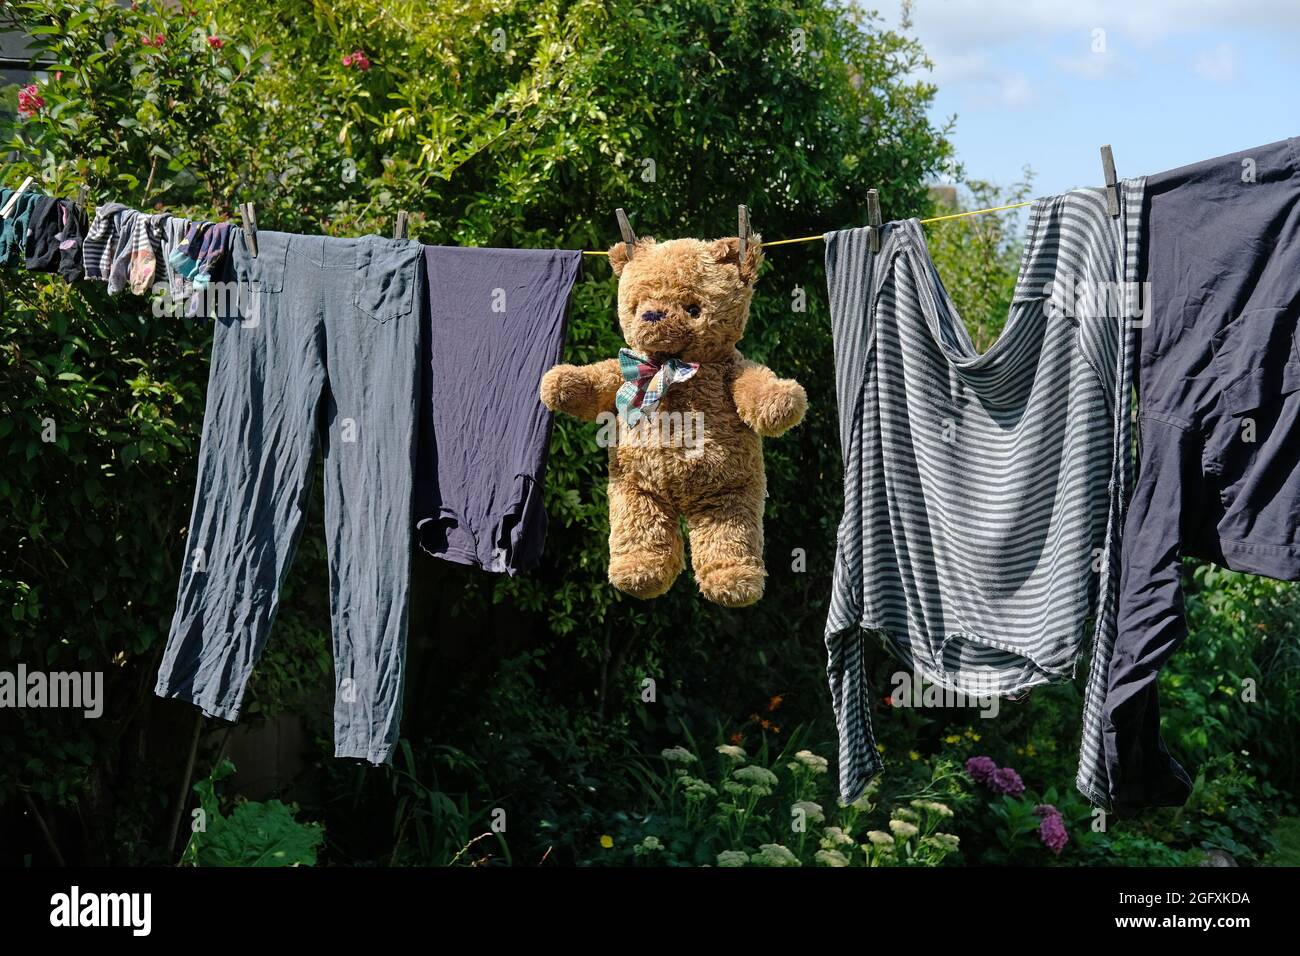 A teddy bear drying on a washing line after being washed Stock Photo